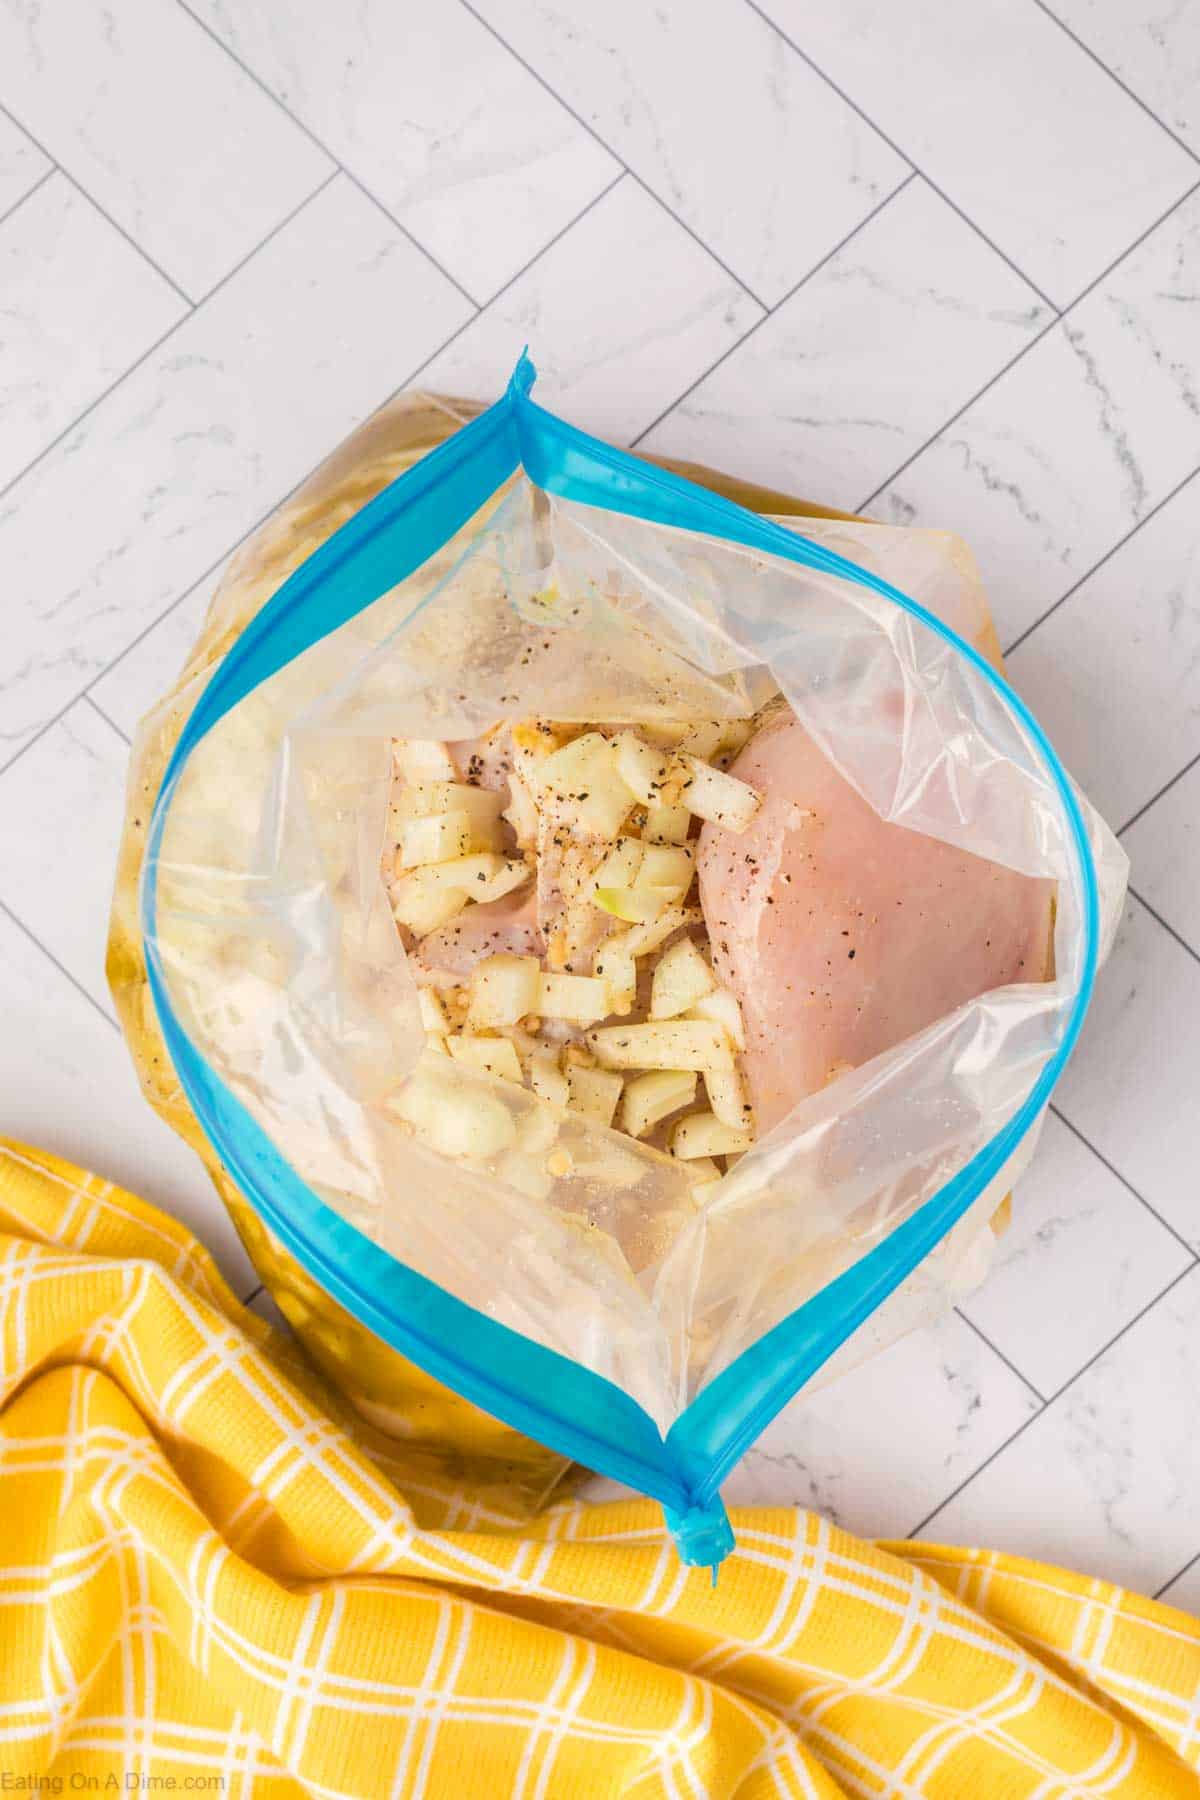 Place the chicken in a zip lock bag and topped with lemon marinade and chopped onions